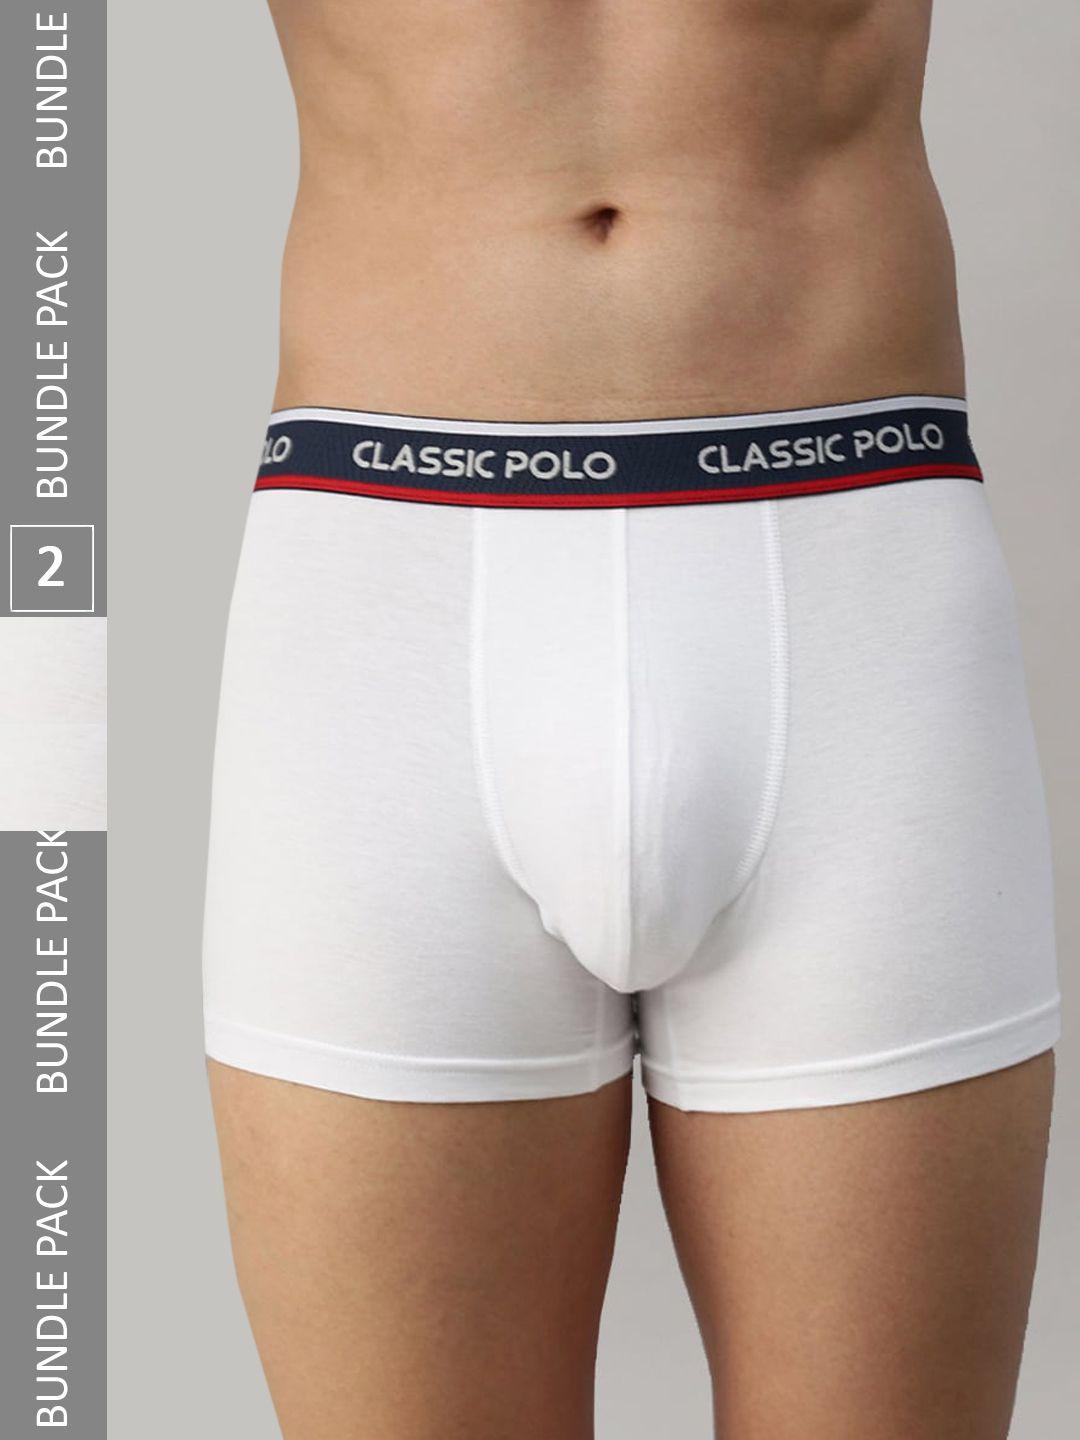 classic polo men pack of 2 anti-odour basic briefs